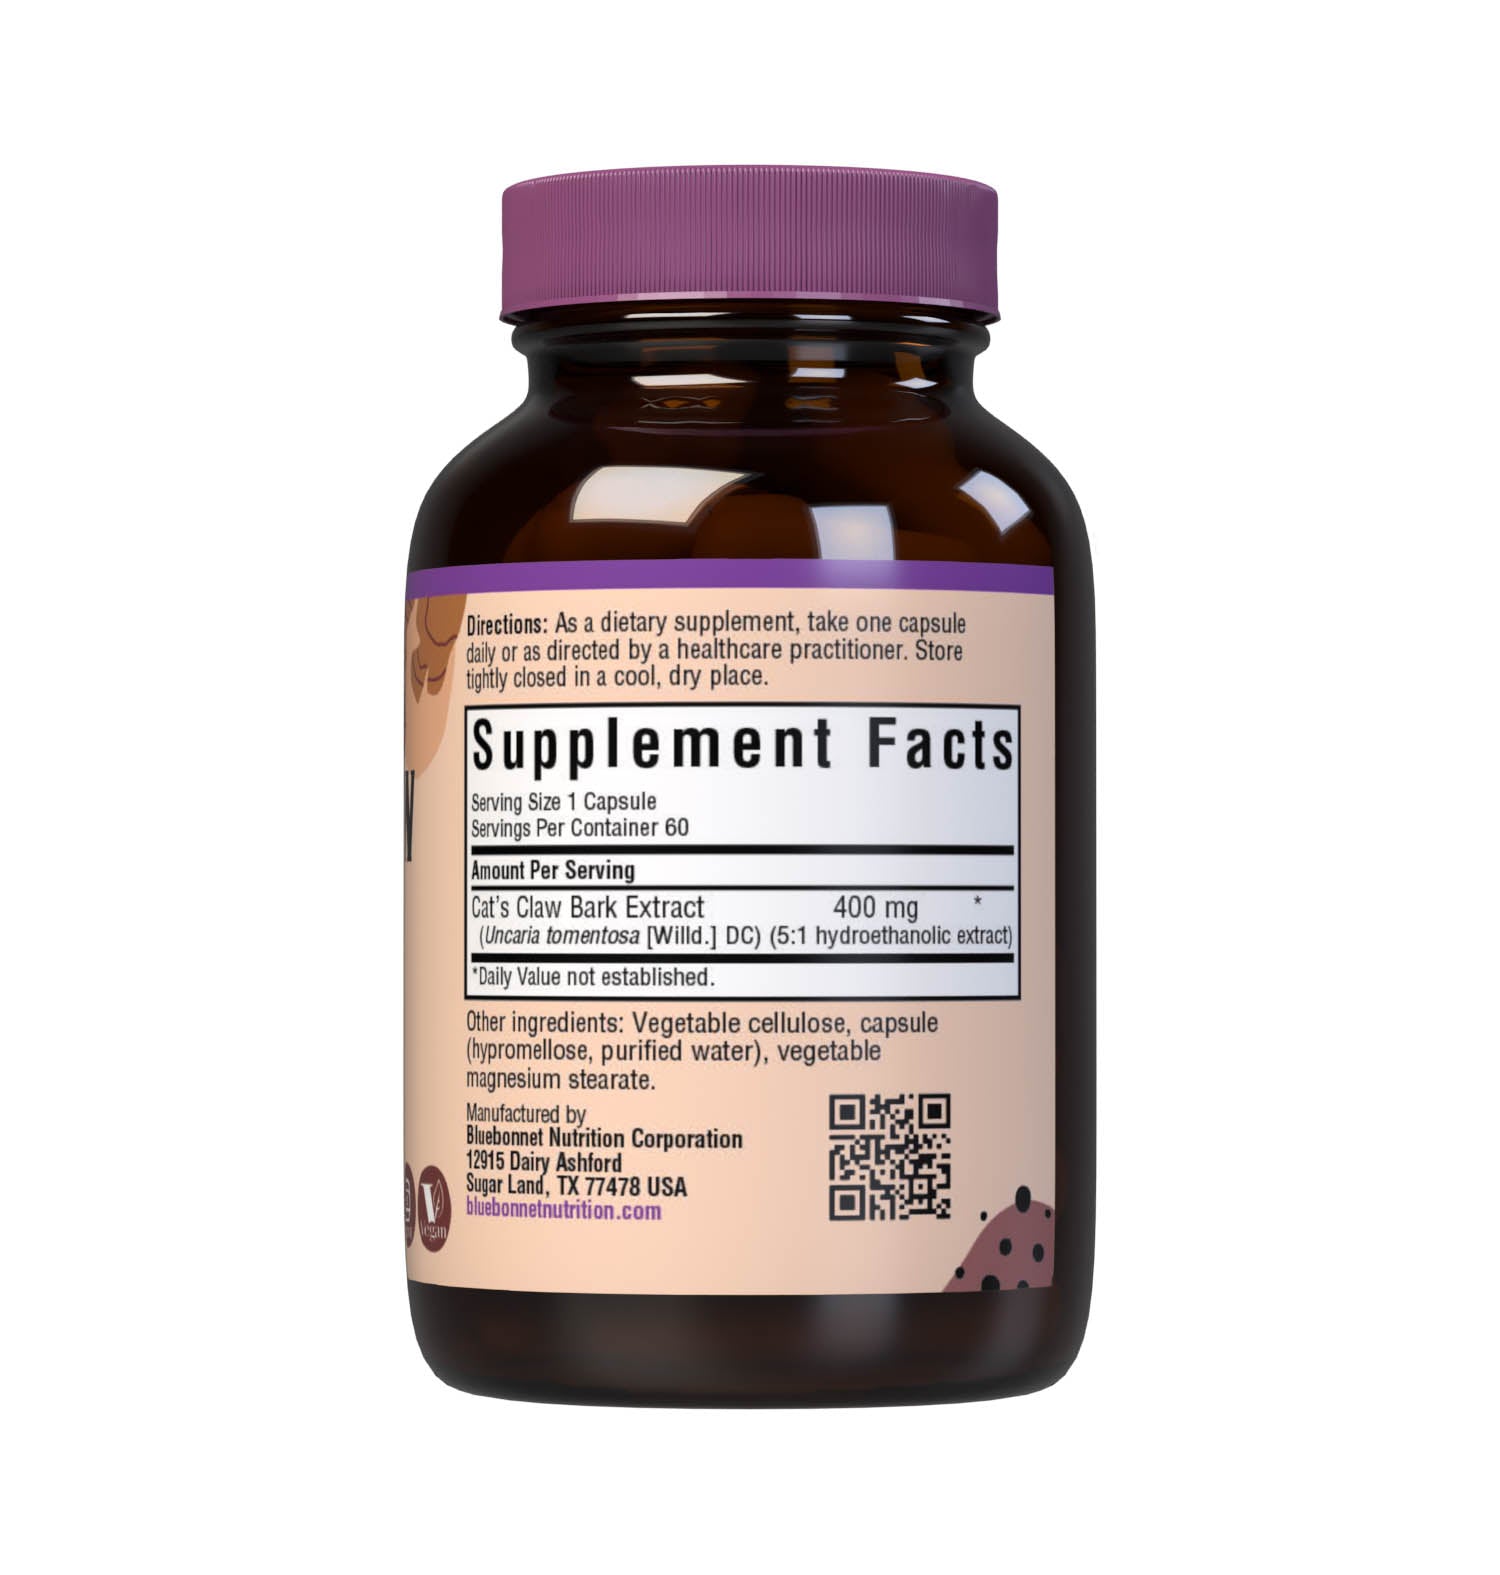 Bluebonnet’s Cat’s Claw Bark Extract 60 Vegetable Capsules contain a full spectrum extract of cat’s claw bark that is carefully produced by a clean and gentle water-based extraction method is employed to capture and preserve cat’s claw’s most valuable components. Supplement facts panel. #size_60 count